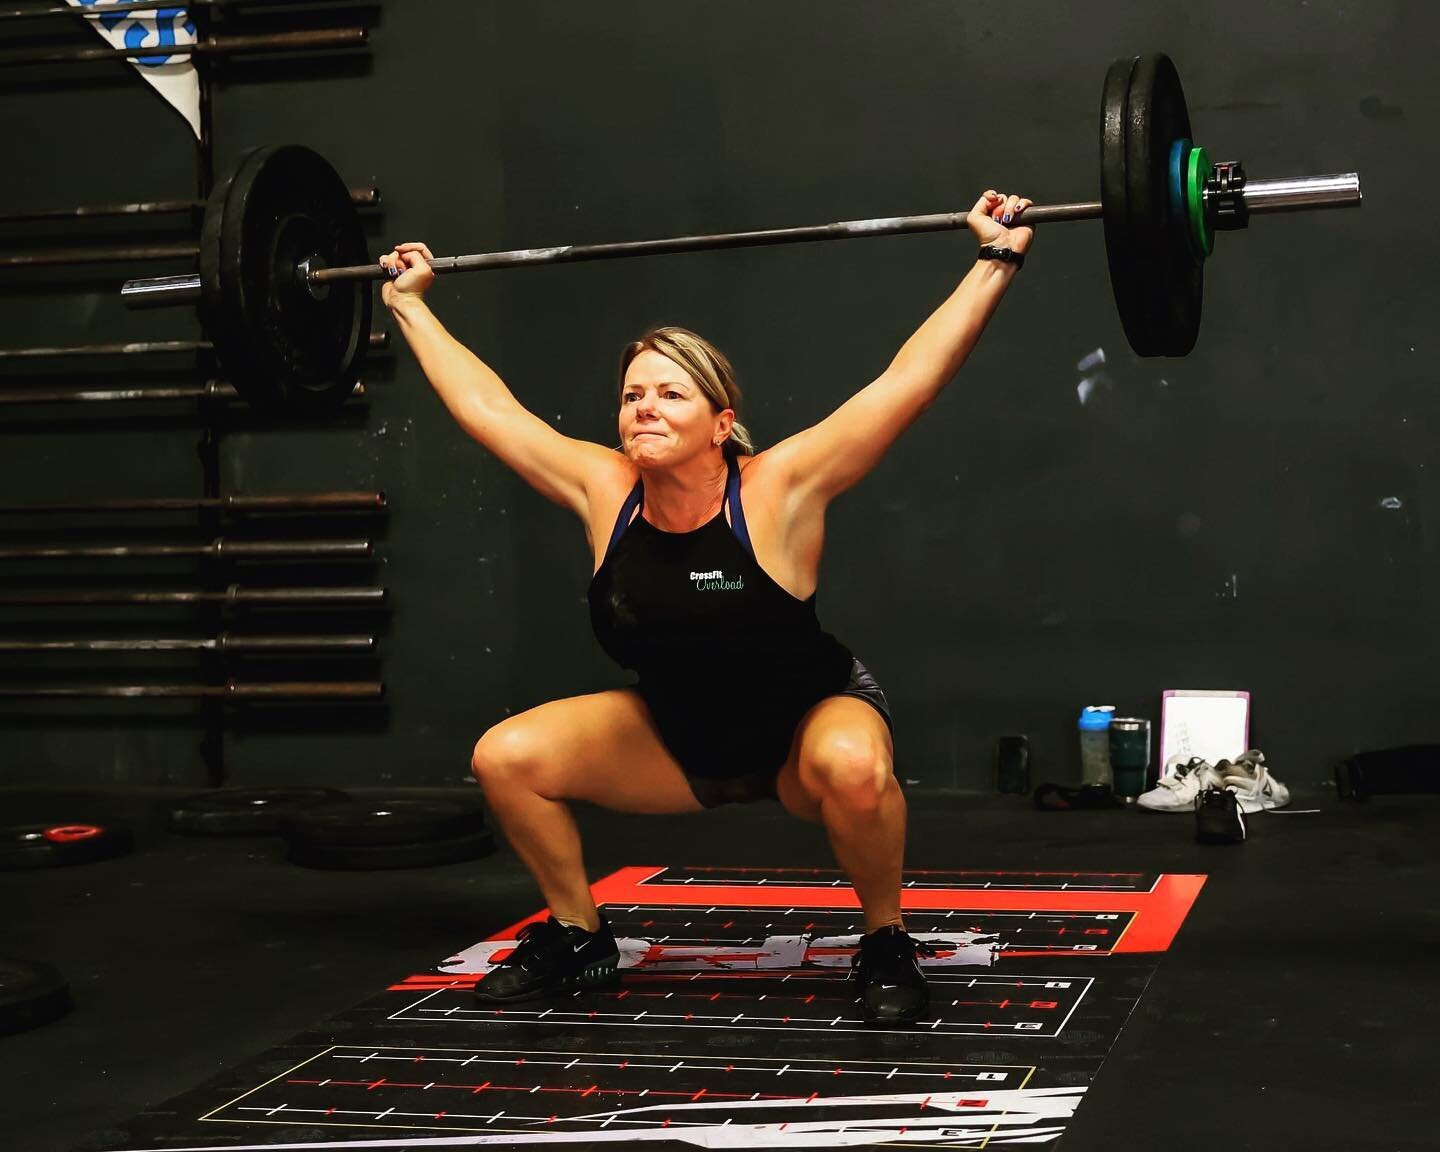 Strength:
&quot;STRENGTH
Every 2:00 &times; 8:00... (4 Sets)
Front Squat
5-4-4-4&quot;
WOD:
&quot;For Time:
100 Double Unders
20 Overhead Squat 115/75
100 Double Unders
5 Rope Climbs&quot;

📸kevin_delfuego